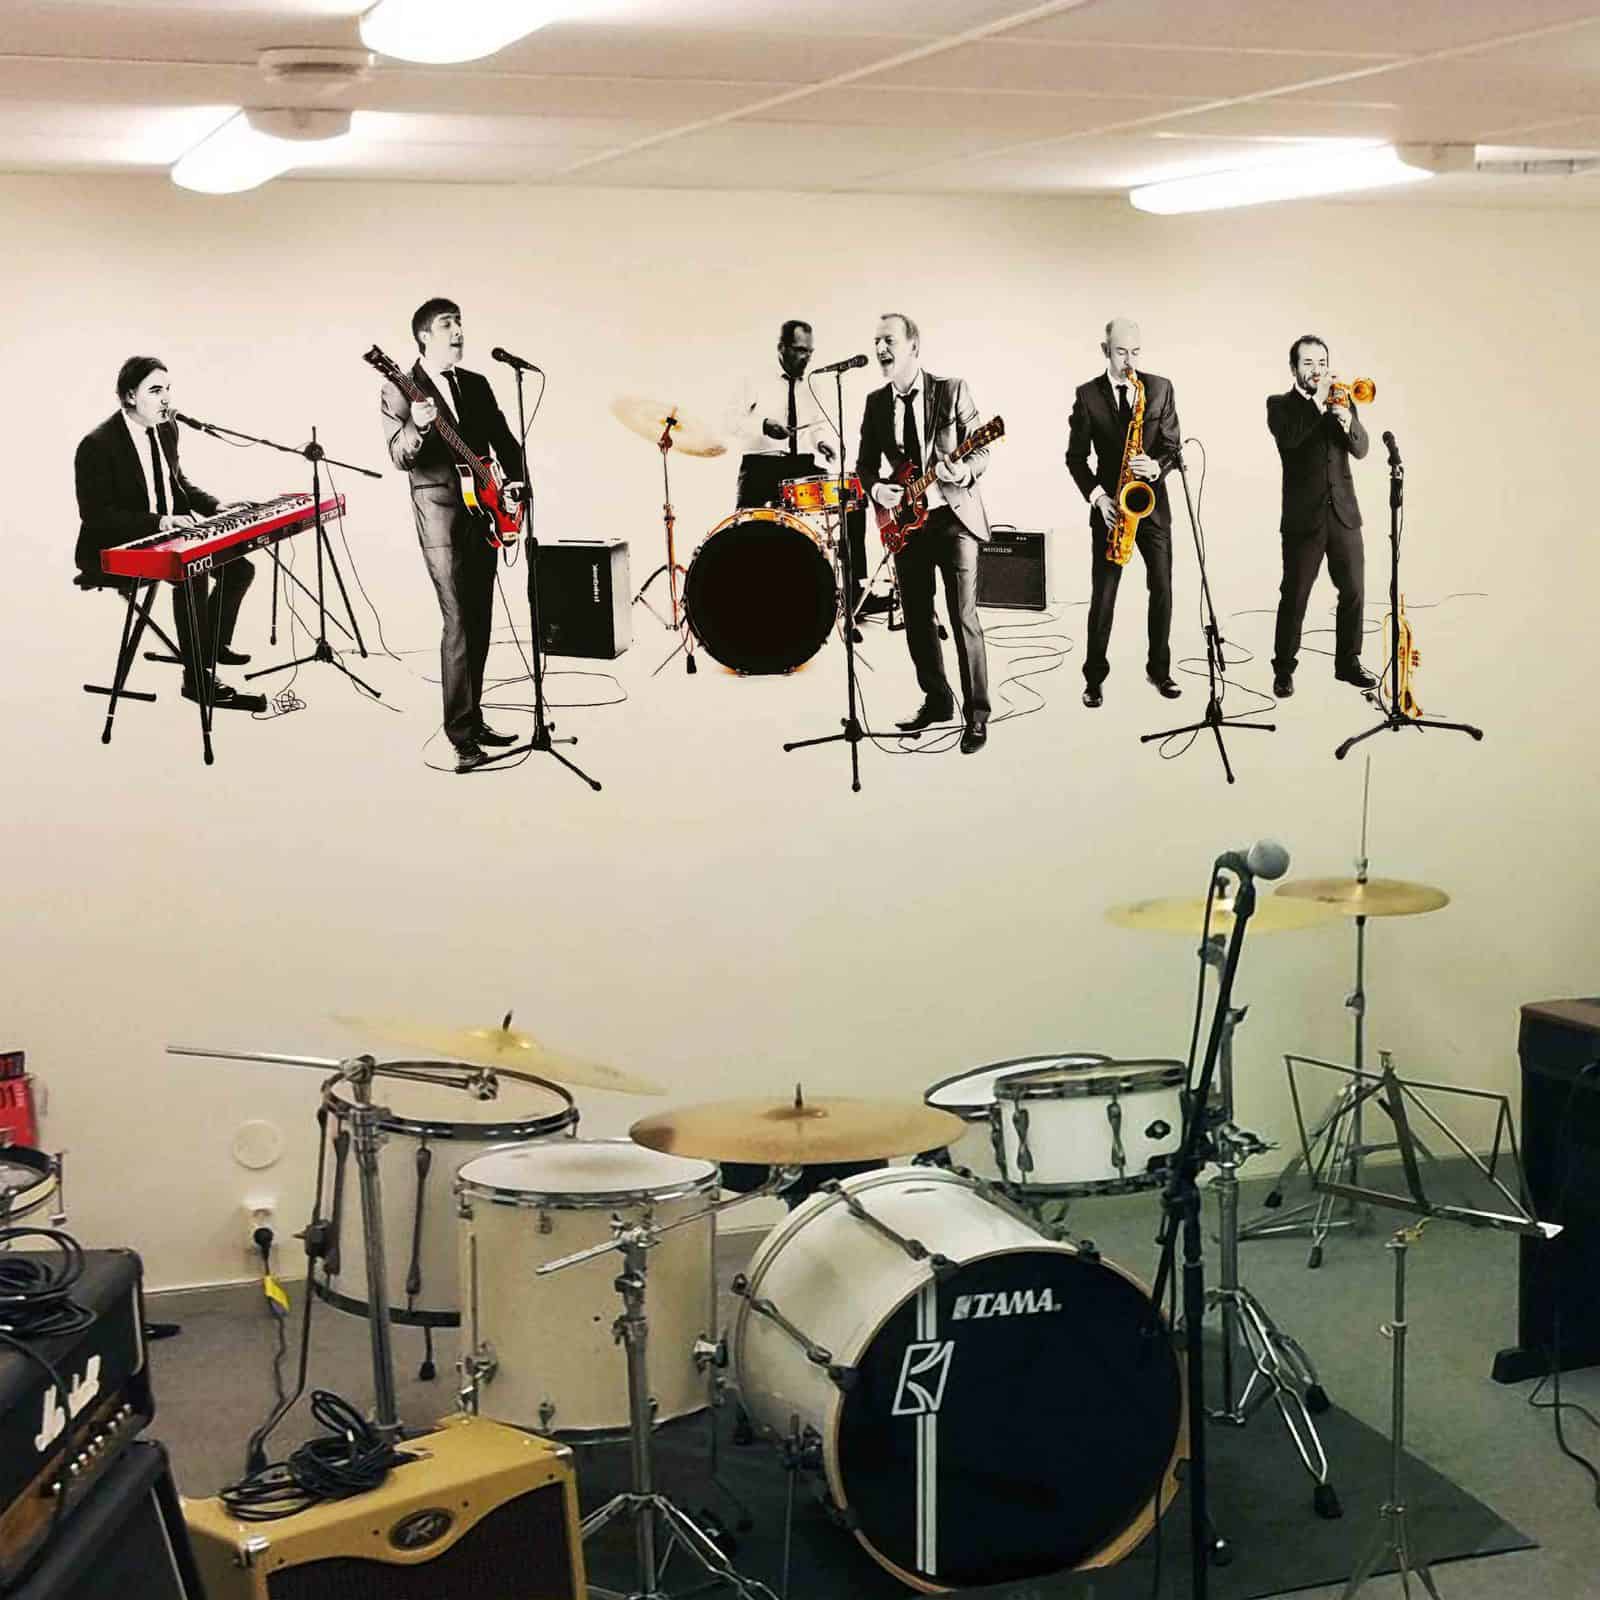 Print your own music band wall sticker